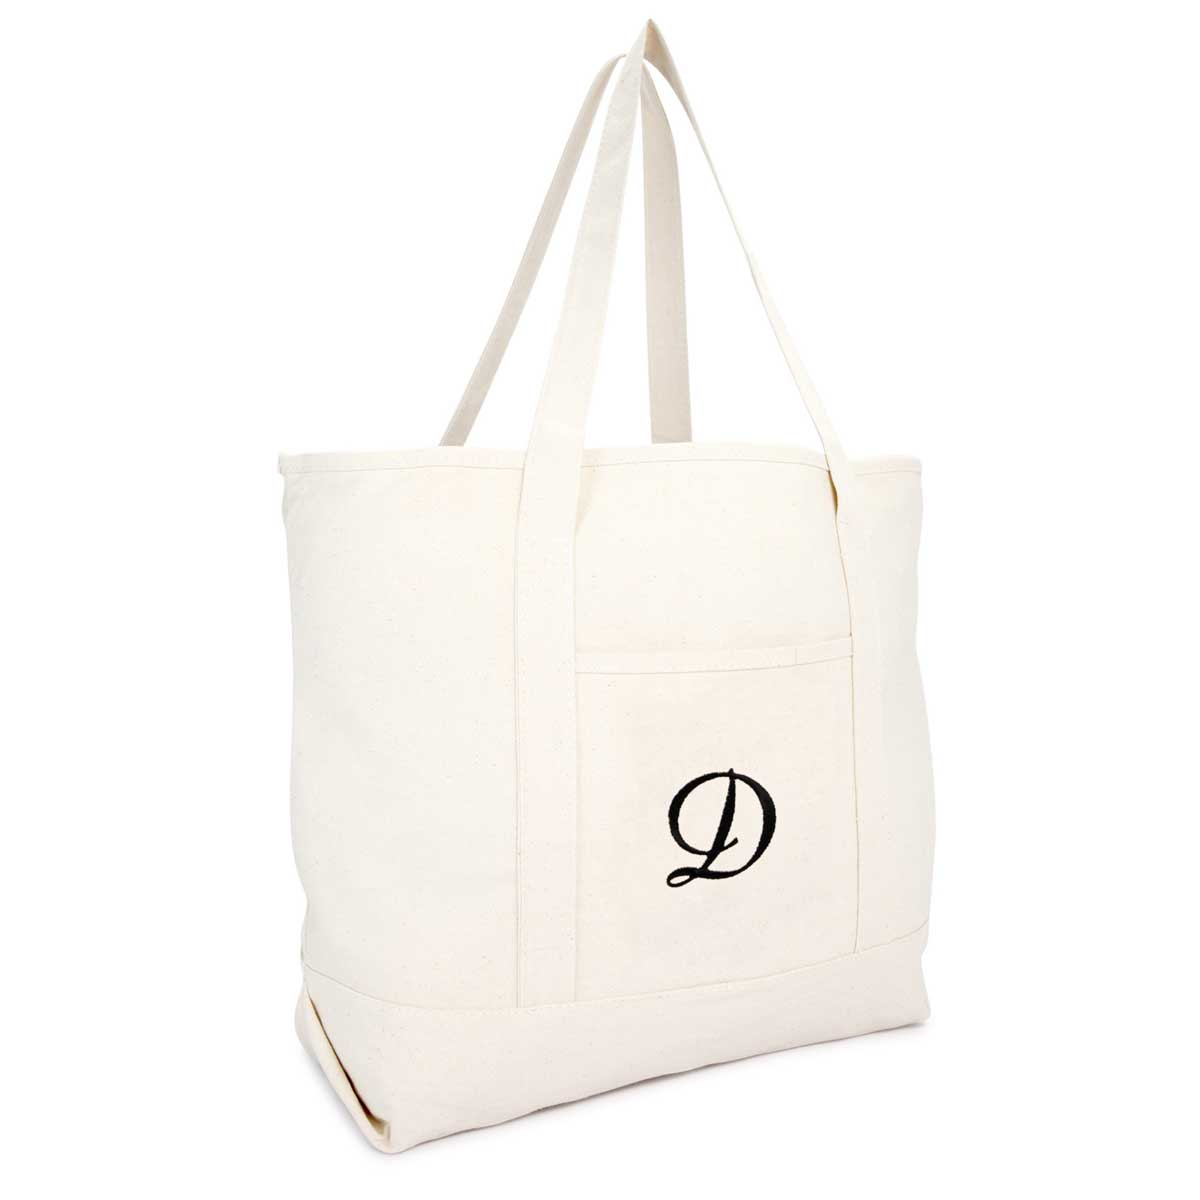 Dalix Monogram Bag Personalized Totes For Women Open Top Natural Letter A-Z